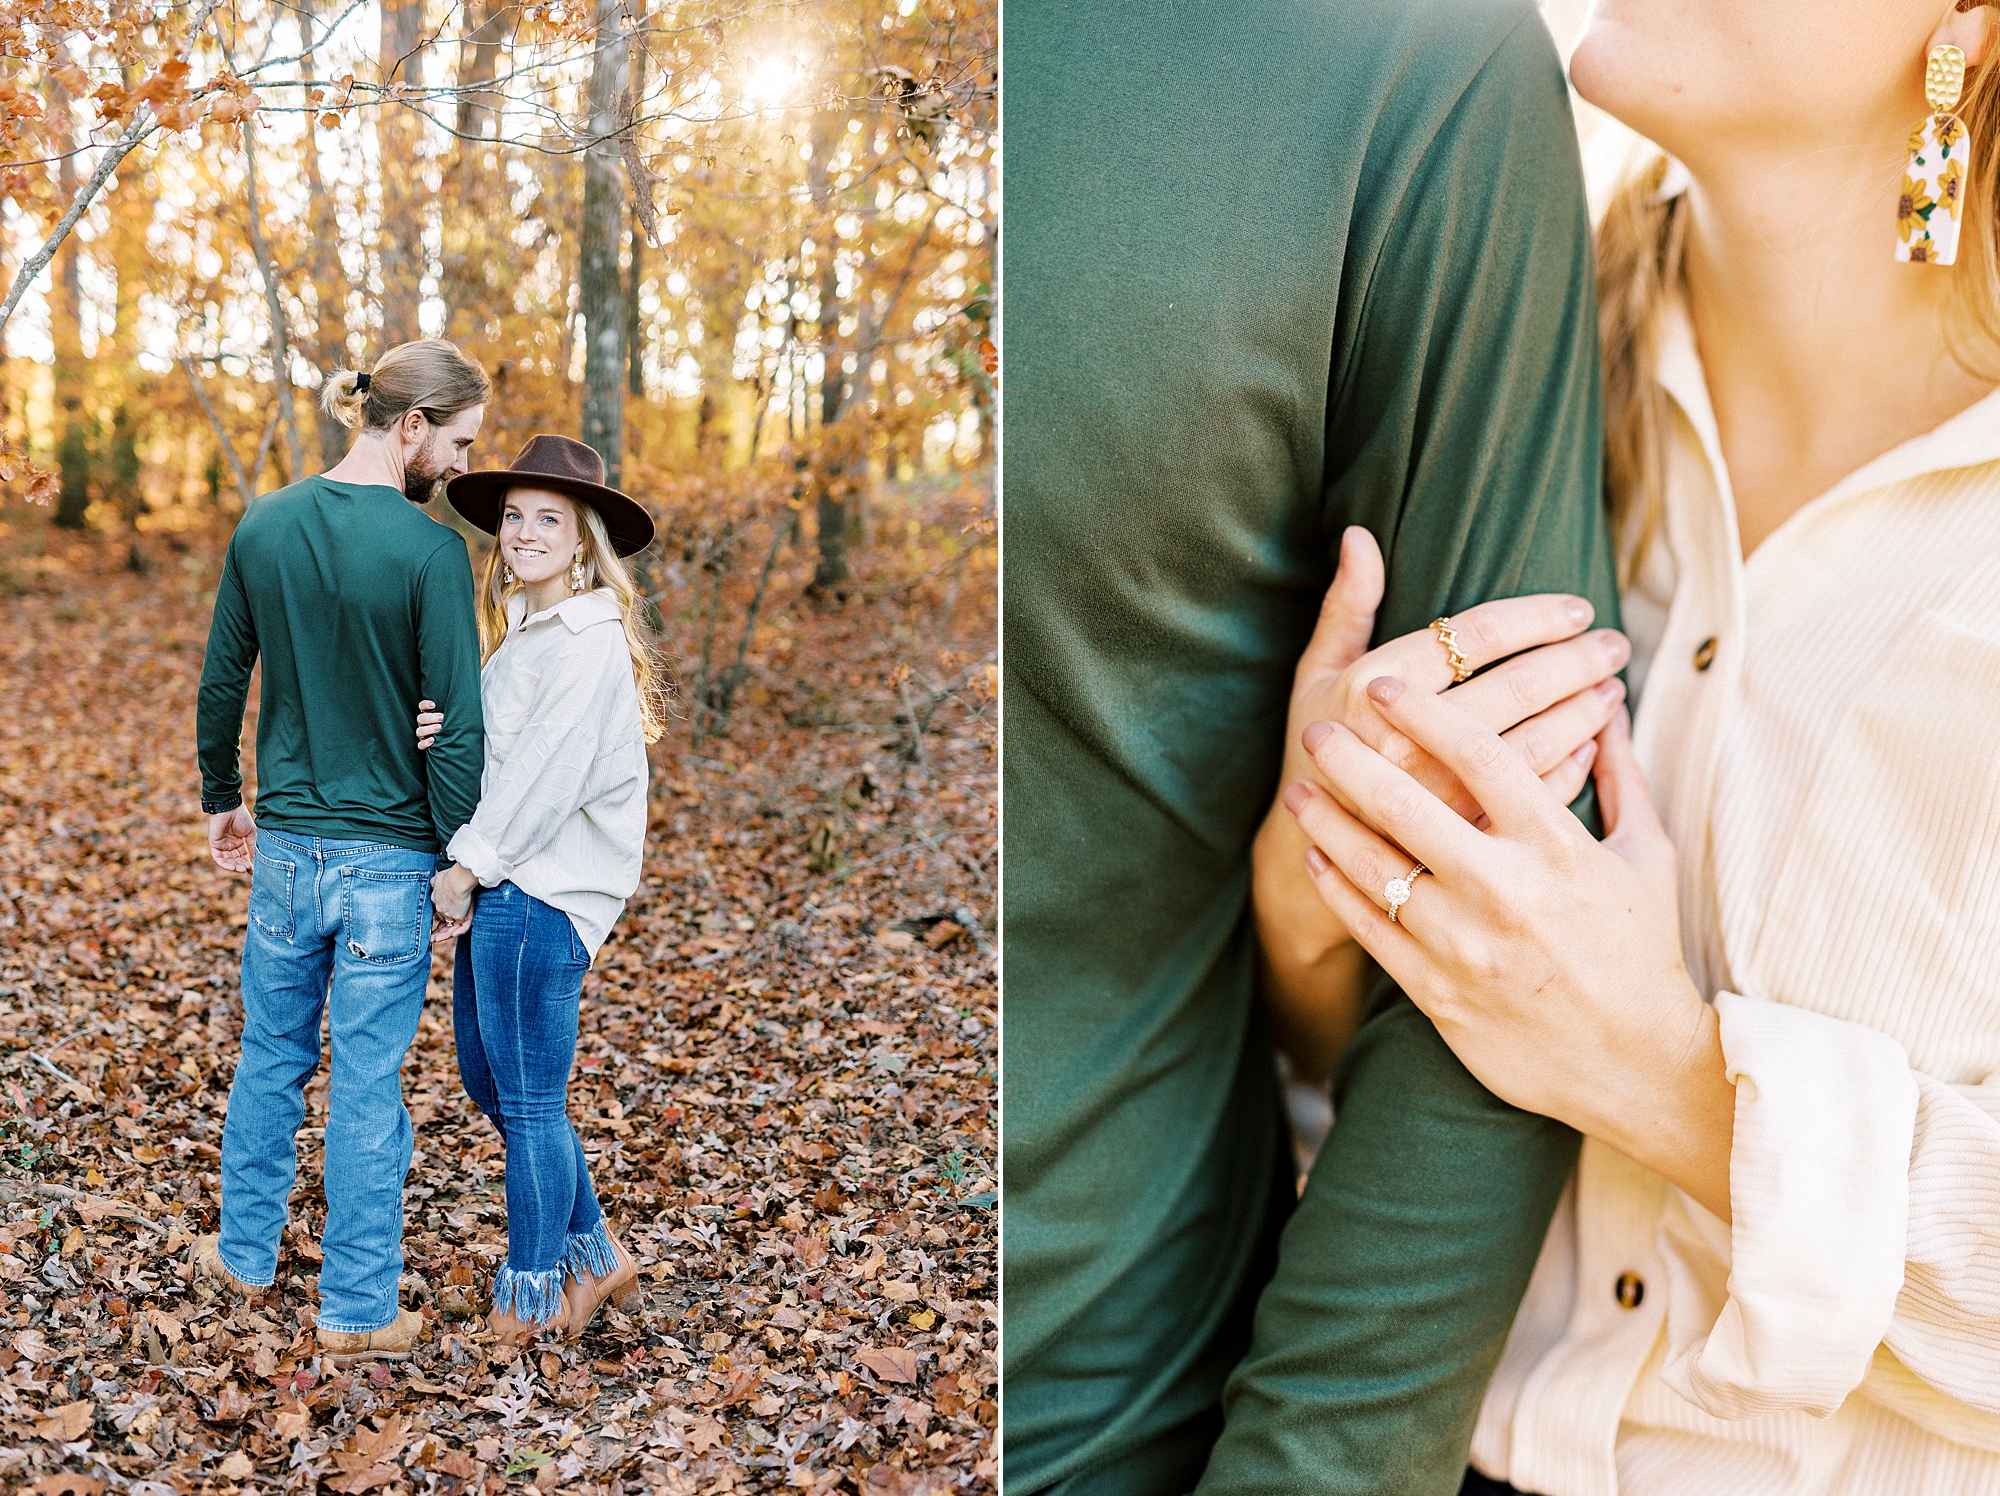 bride holds arm of groom in green sweater showing off ring